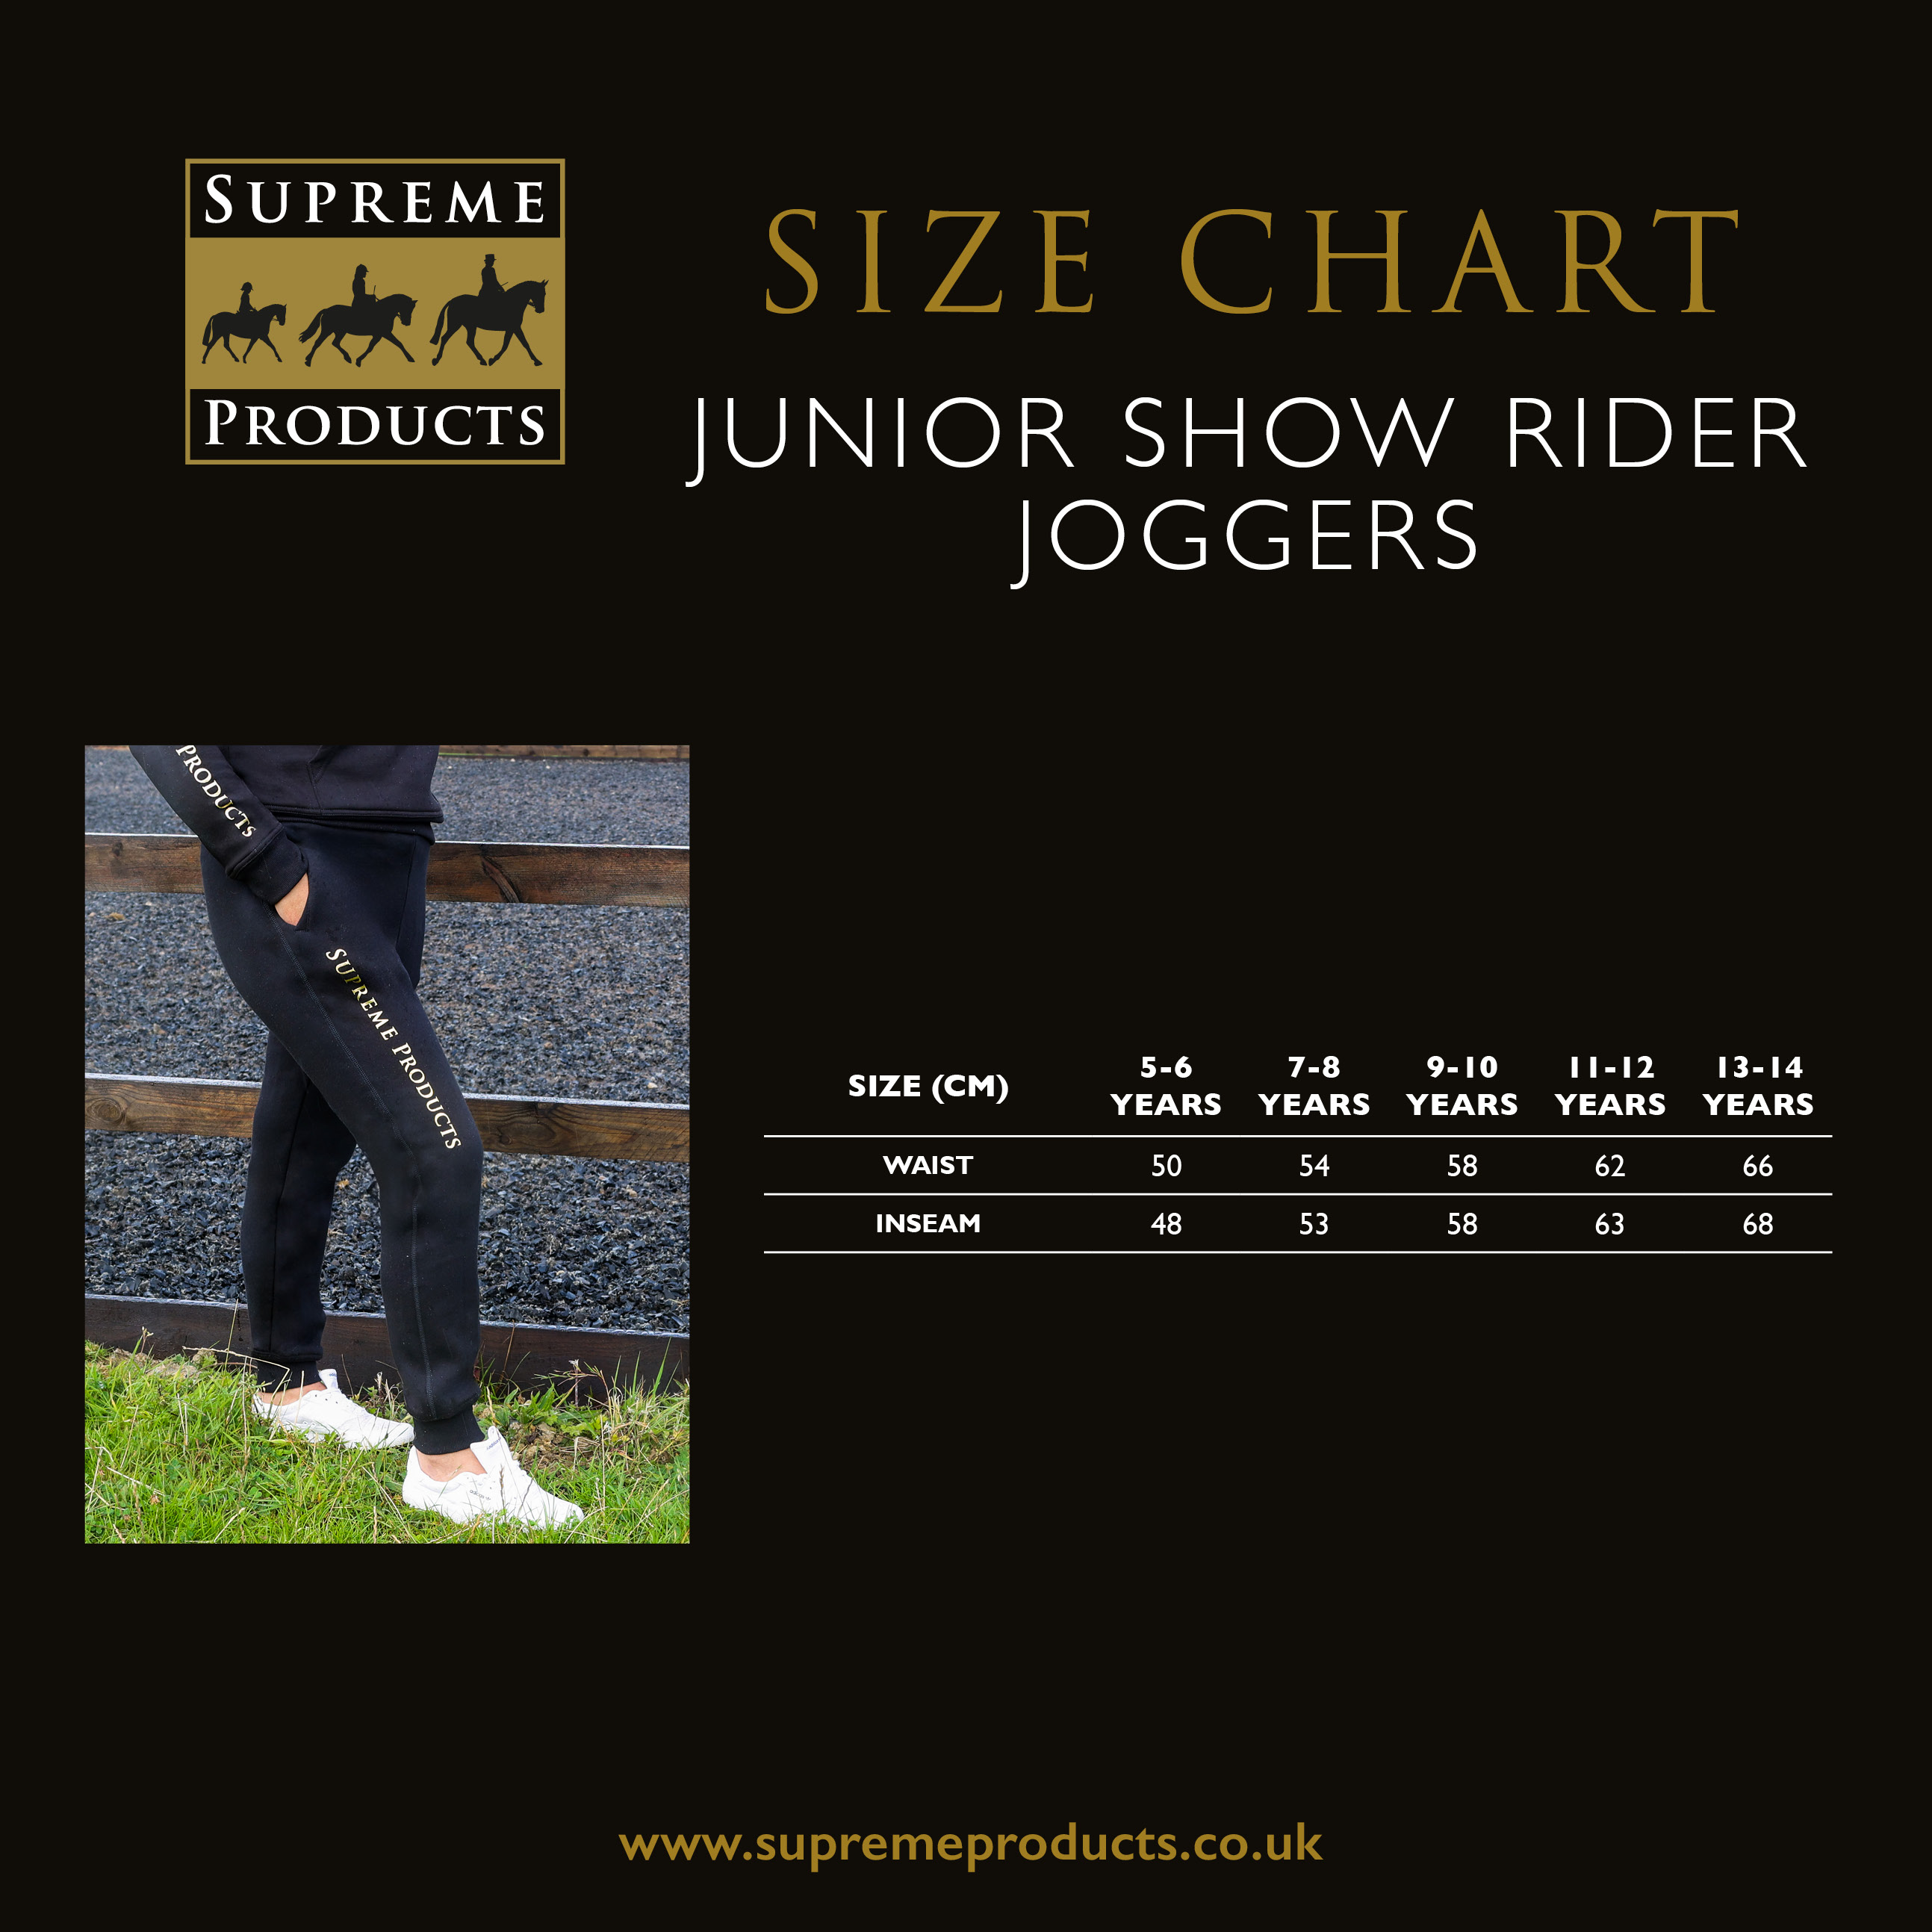 https://www.supremeproducts.co.uk/storage/uploads/Size%20Guide/Rider/Clothing/Supreme%20Products%20-%20Size%20Chart%20-%20Active%20Junior%20Show%20Rider%20Joggers%202.jpg